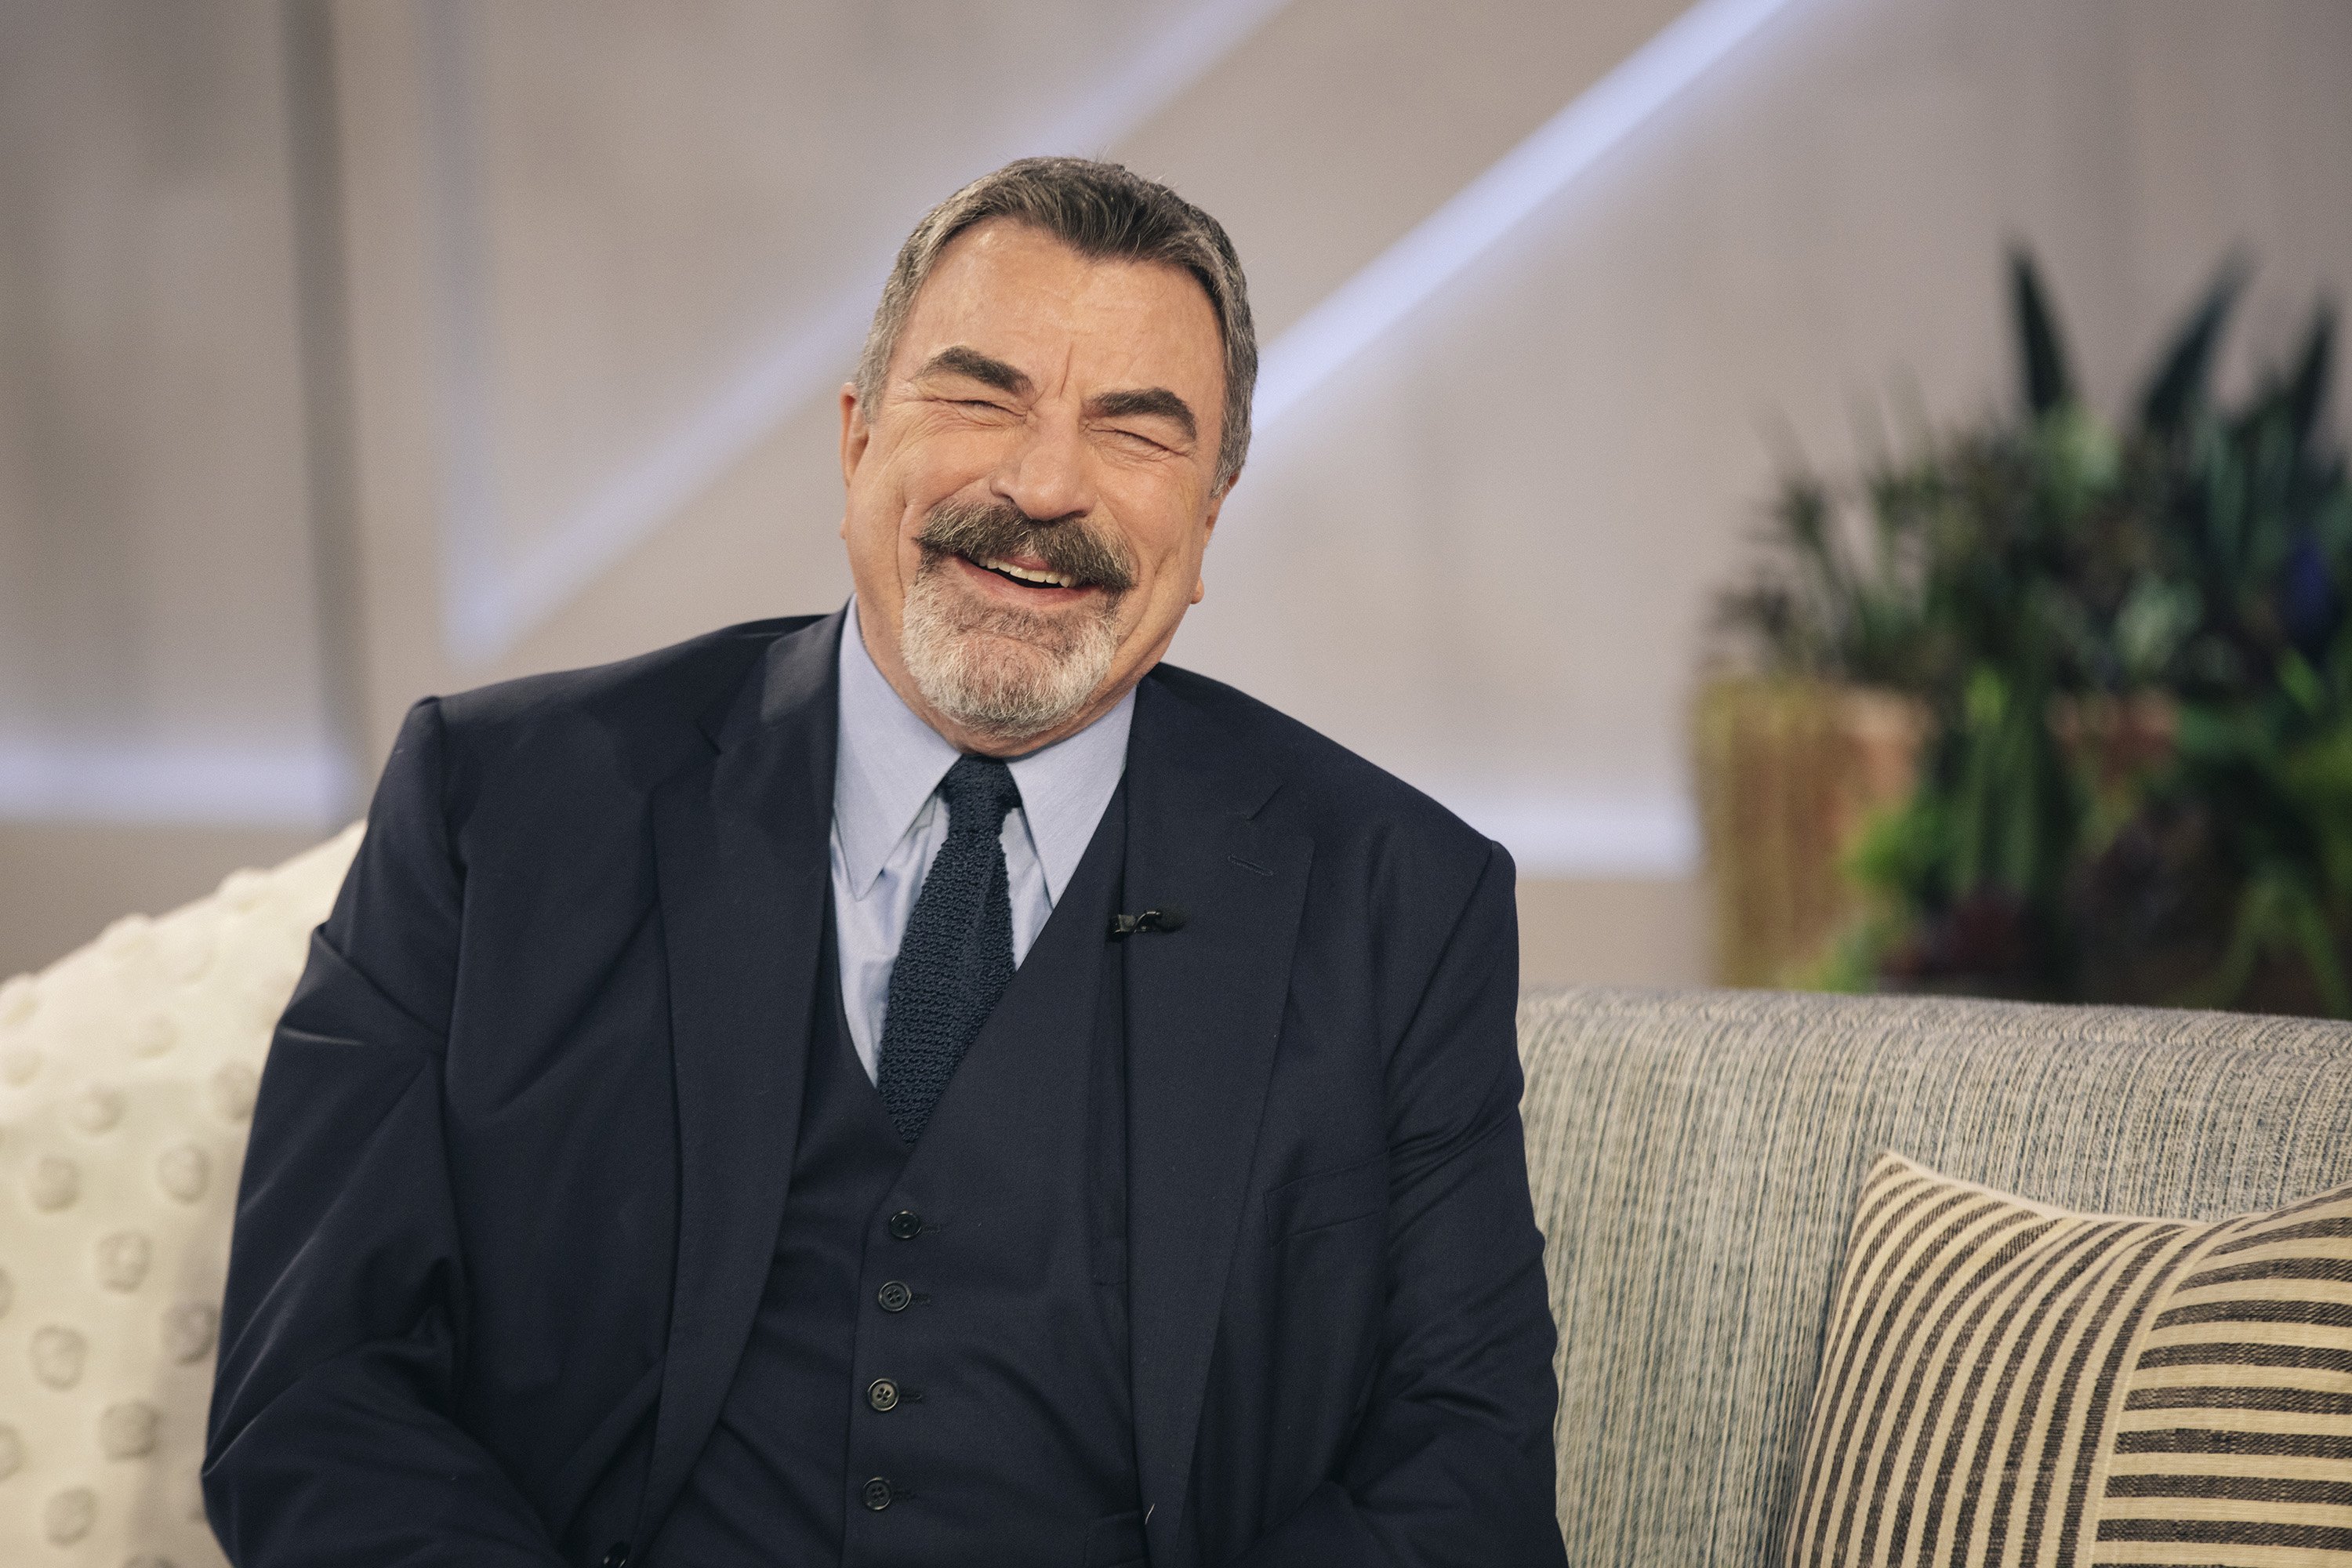 Tom Selleck on THE KELLY CLARKSON SHOW. | Source: Getty Images